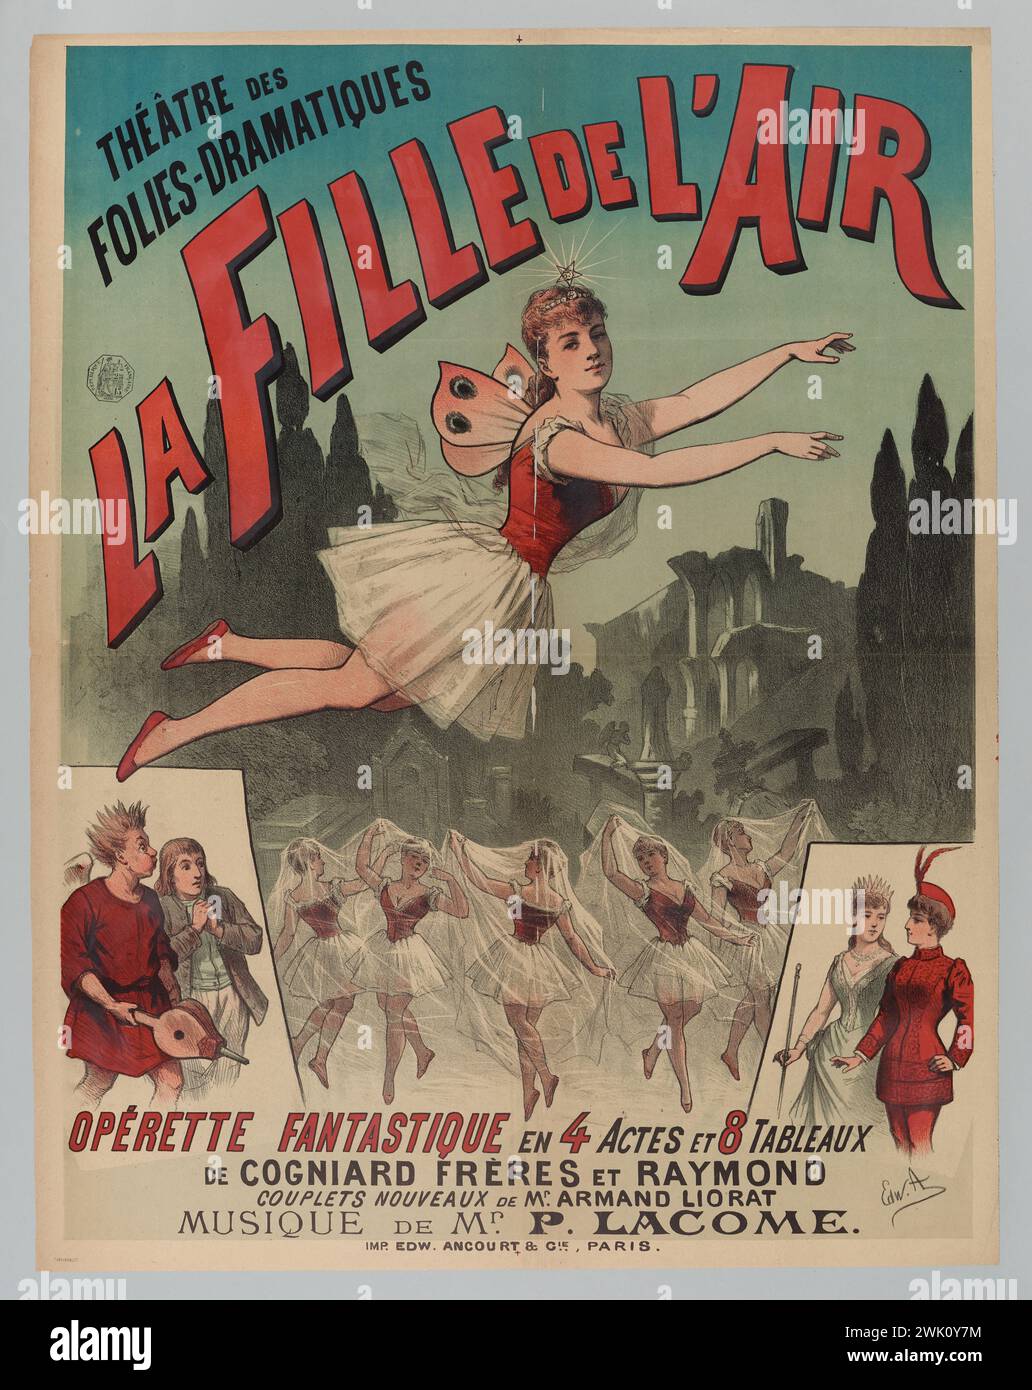 Ancourt, Edward (n.1841-08-24-D.1921), Theater of/ Folies-Dramatic/ The Fantastic Air/ Operette in 4 acts and 8 Tables/ Cognard Freres and Raymond/ New torques of Mr . Armand Liorat/ Music by Mr. P. Lacome. (Registered title (letter)), 1891. Color lithography. Carnavalet museum, history of Paris. Stock Photo